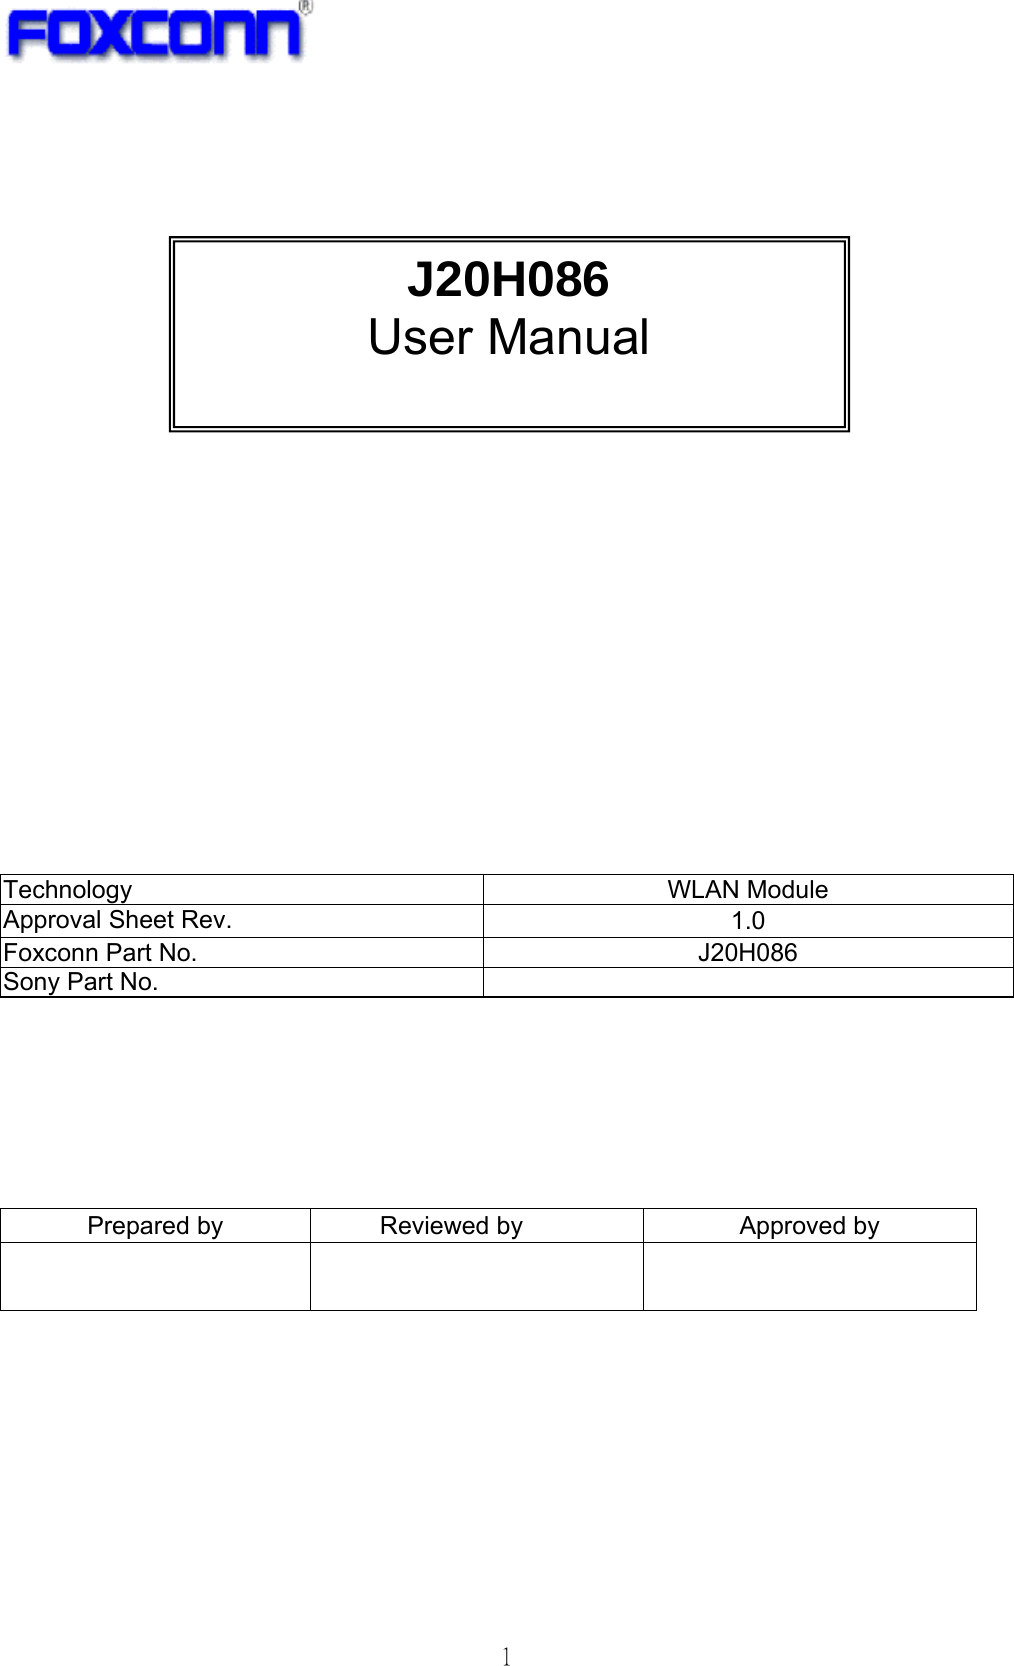   1                          Technology WLAN Module Approval Sheet Rev.  1.0 Foxconn Part No.  J20H086 Sony Part No.          Prepared by  Reviewed by  Approved by          J20H086 User Manual 